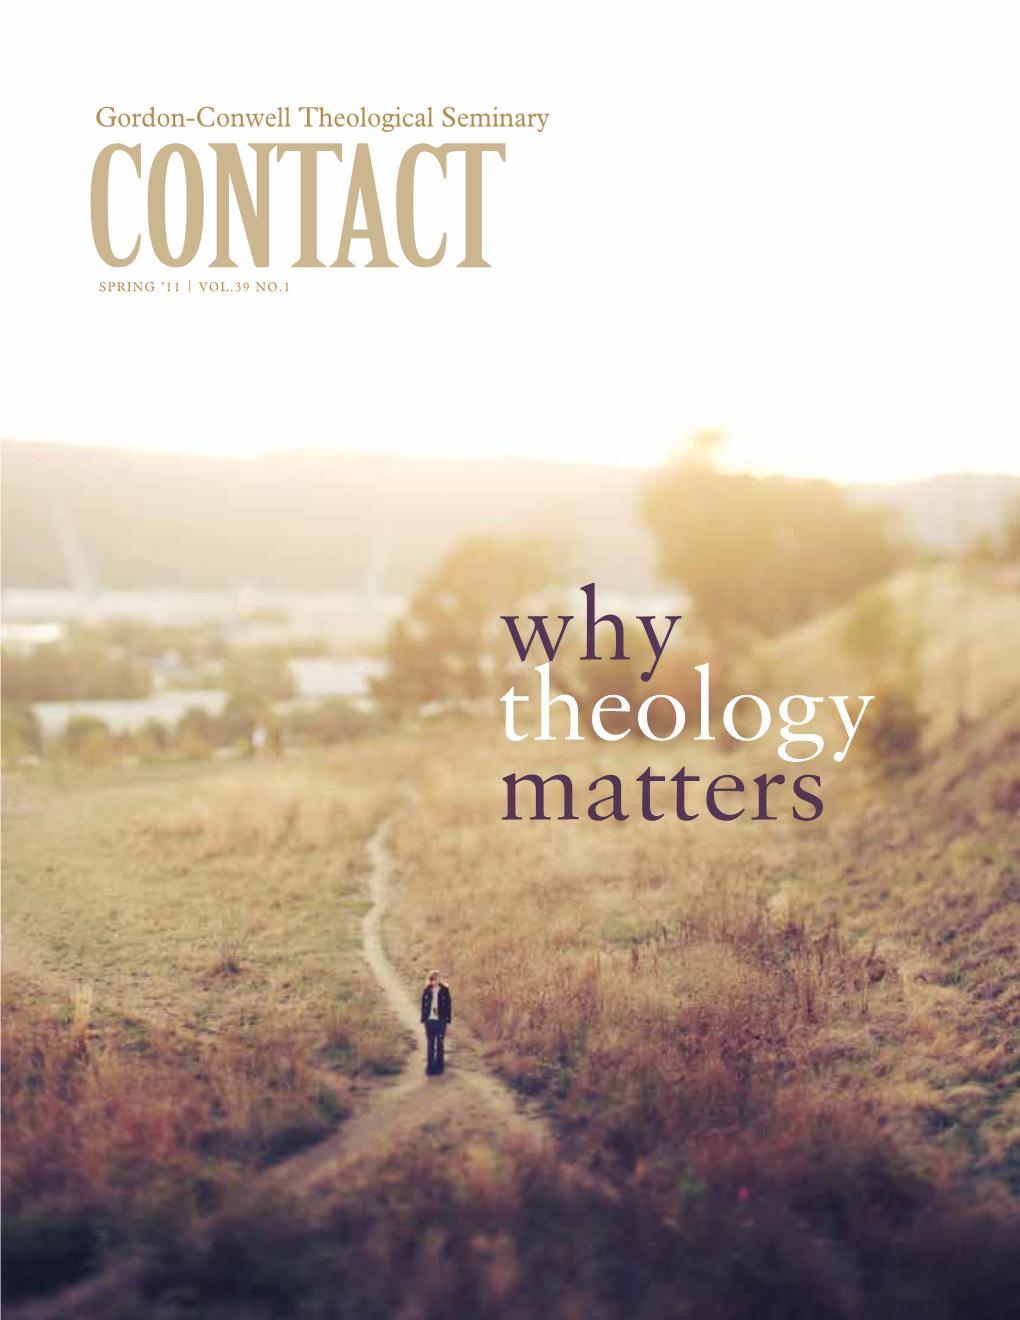 Why Theology Matters